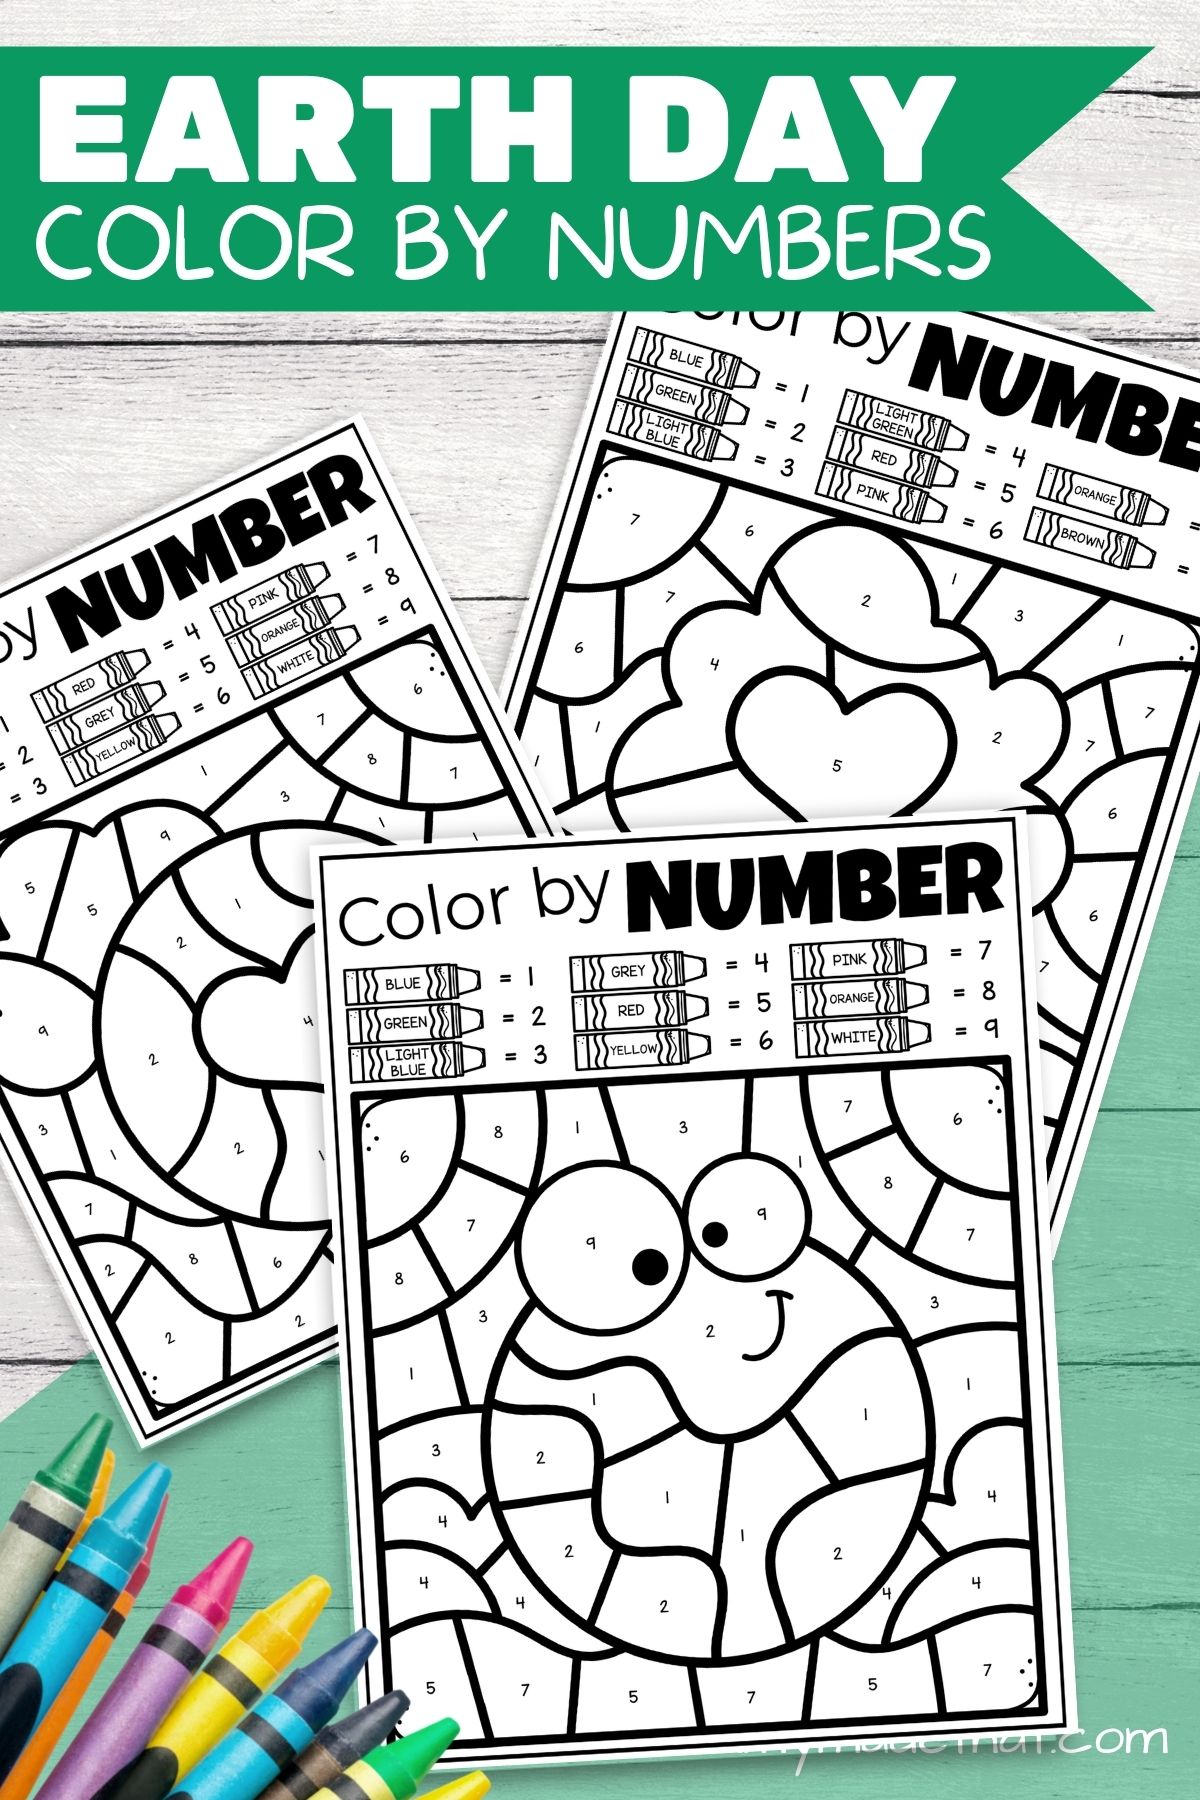 Earth day color by number pages